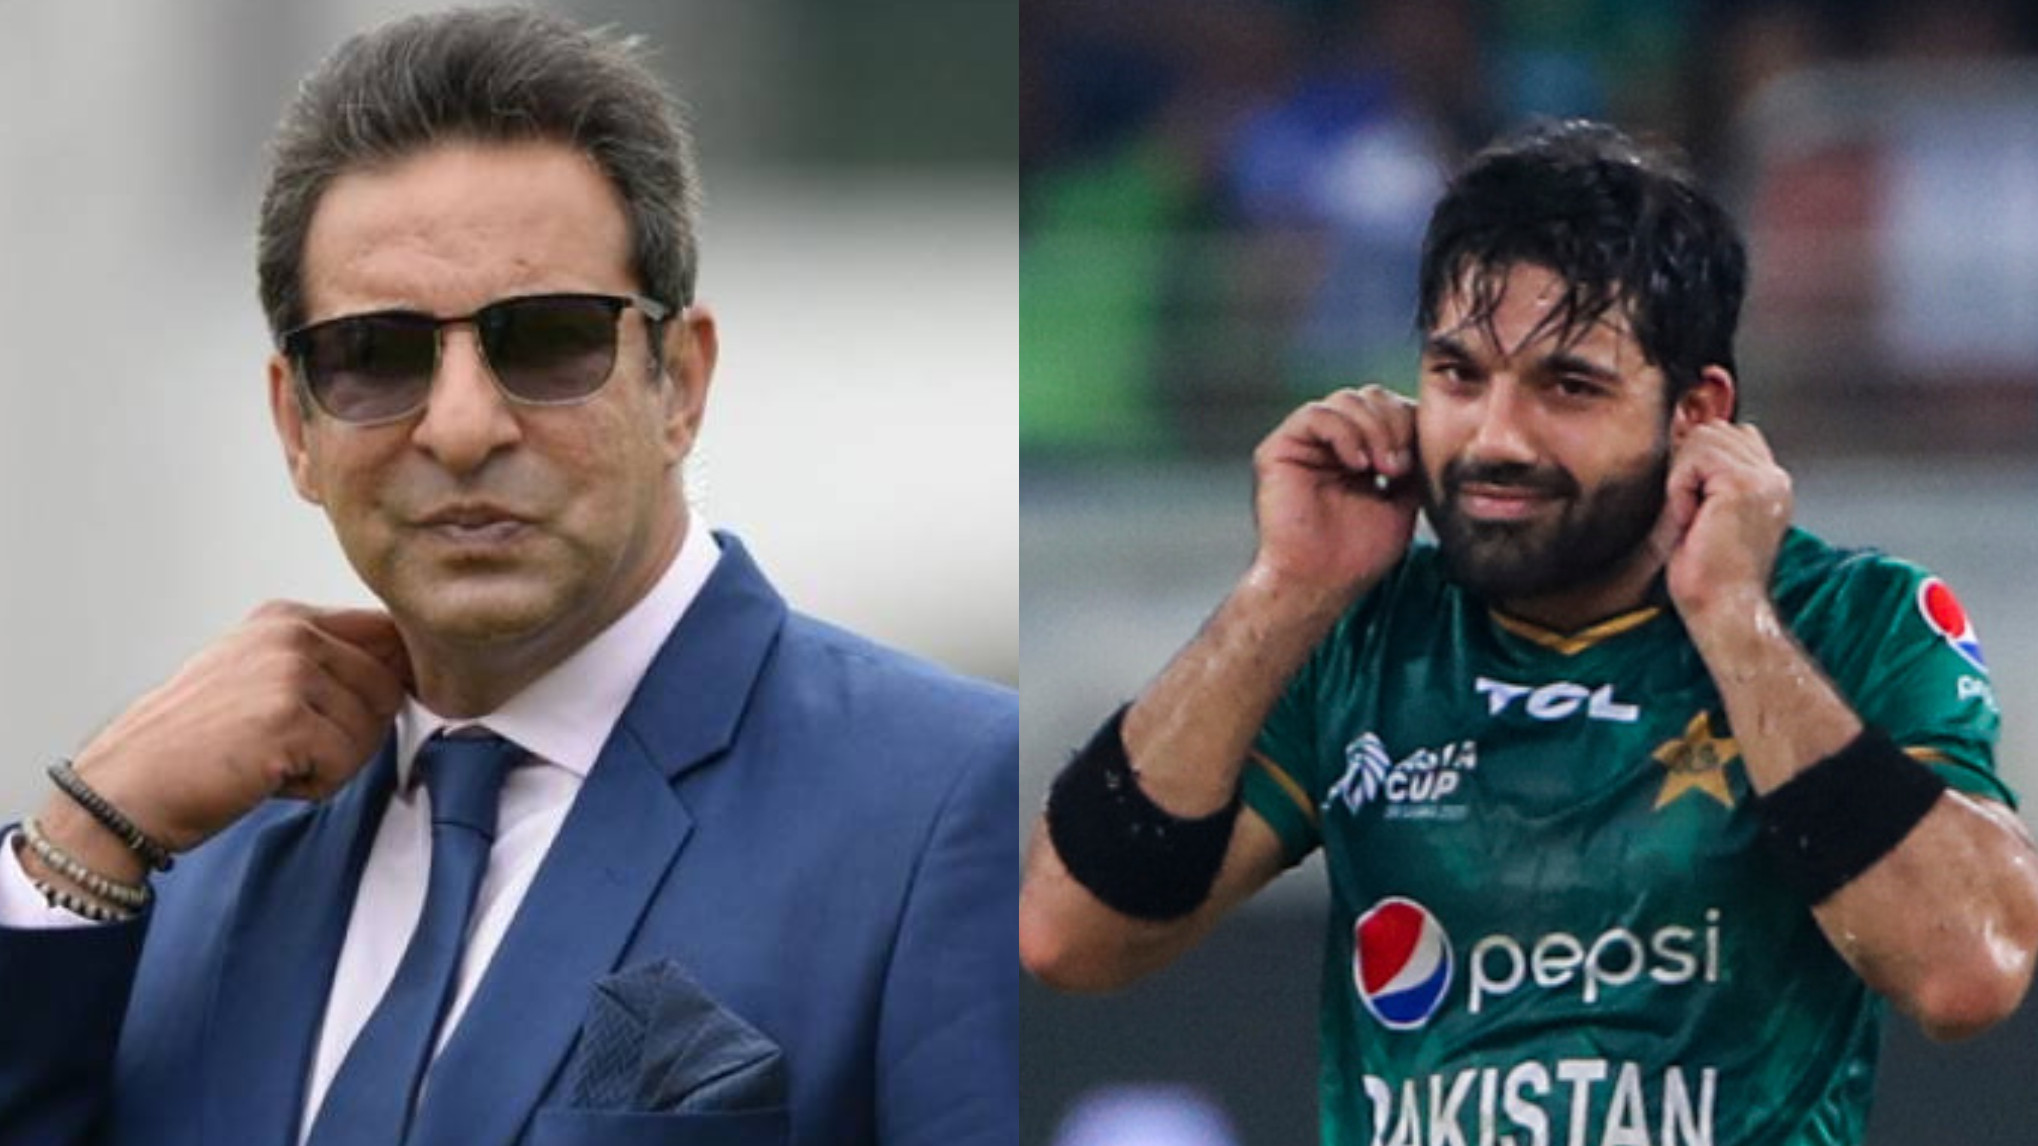 Asia Cup 2022: 'People attacked me when I criticized Rizwan earlier'- Wasim Akram after Pakistan’s loss in final